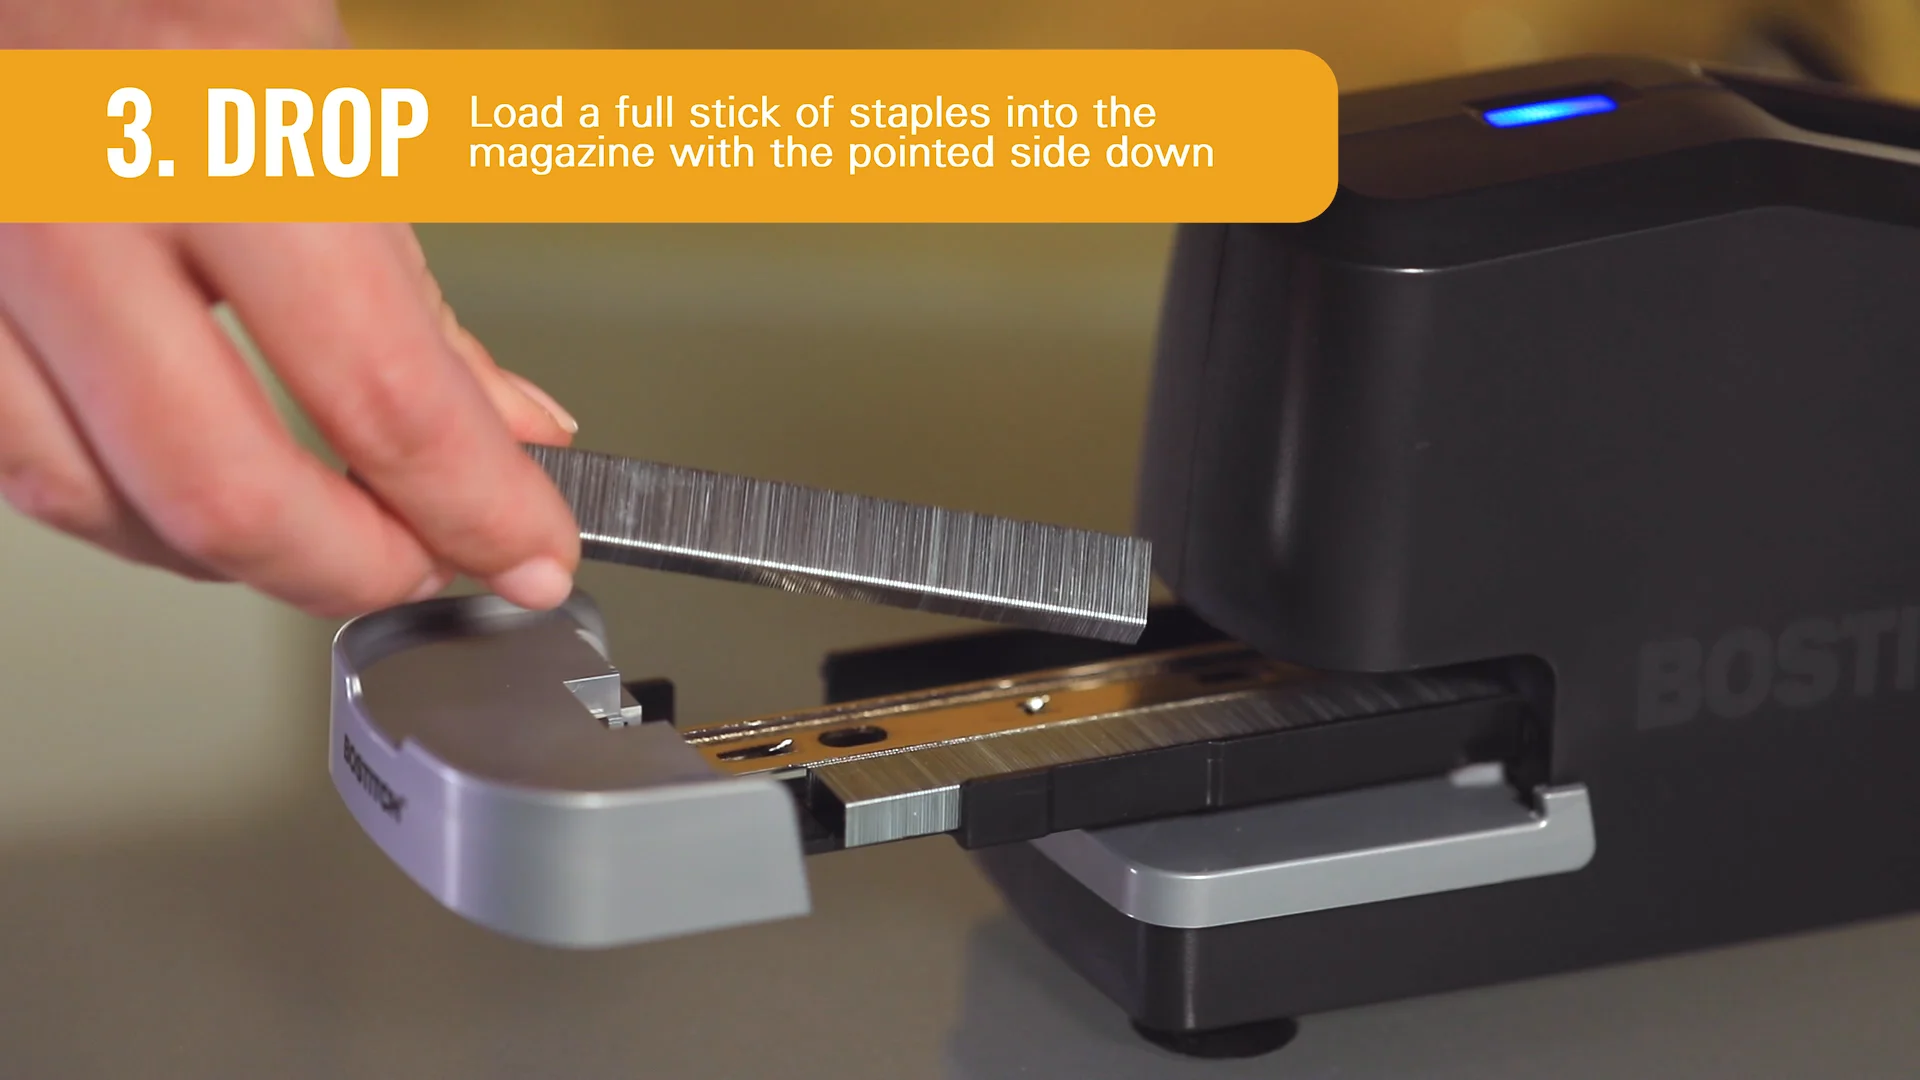 How to Load Your Bostitch® Impulse 25™ Electric Stapler on Vimeo